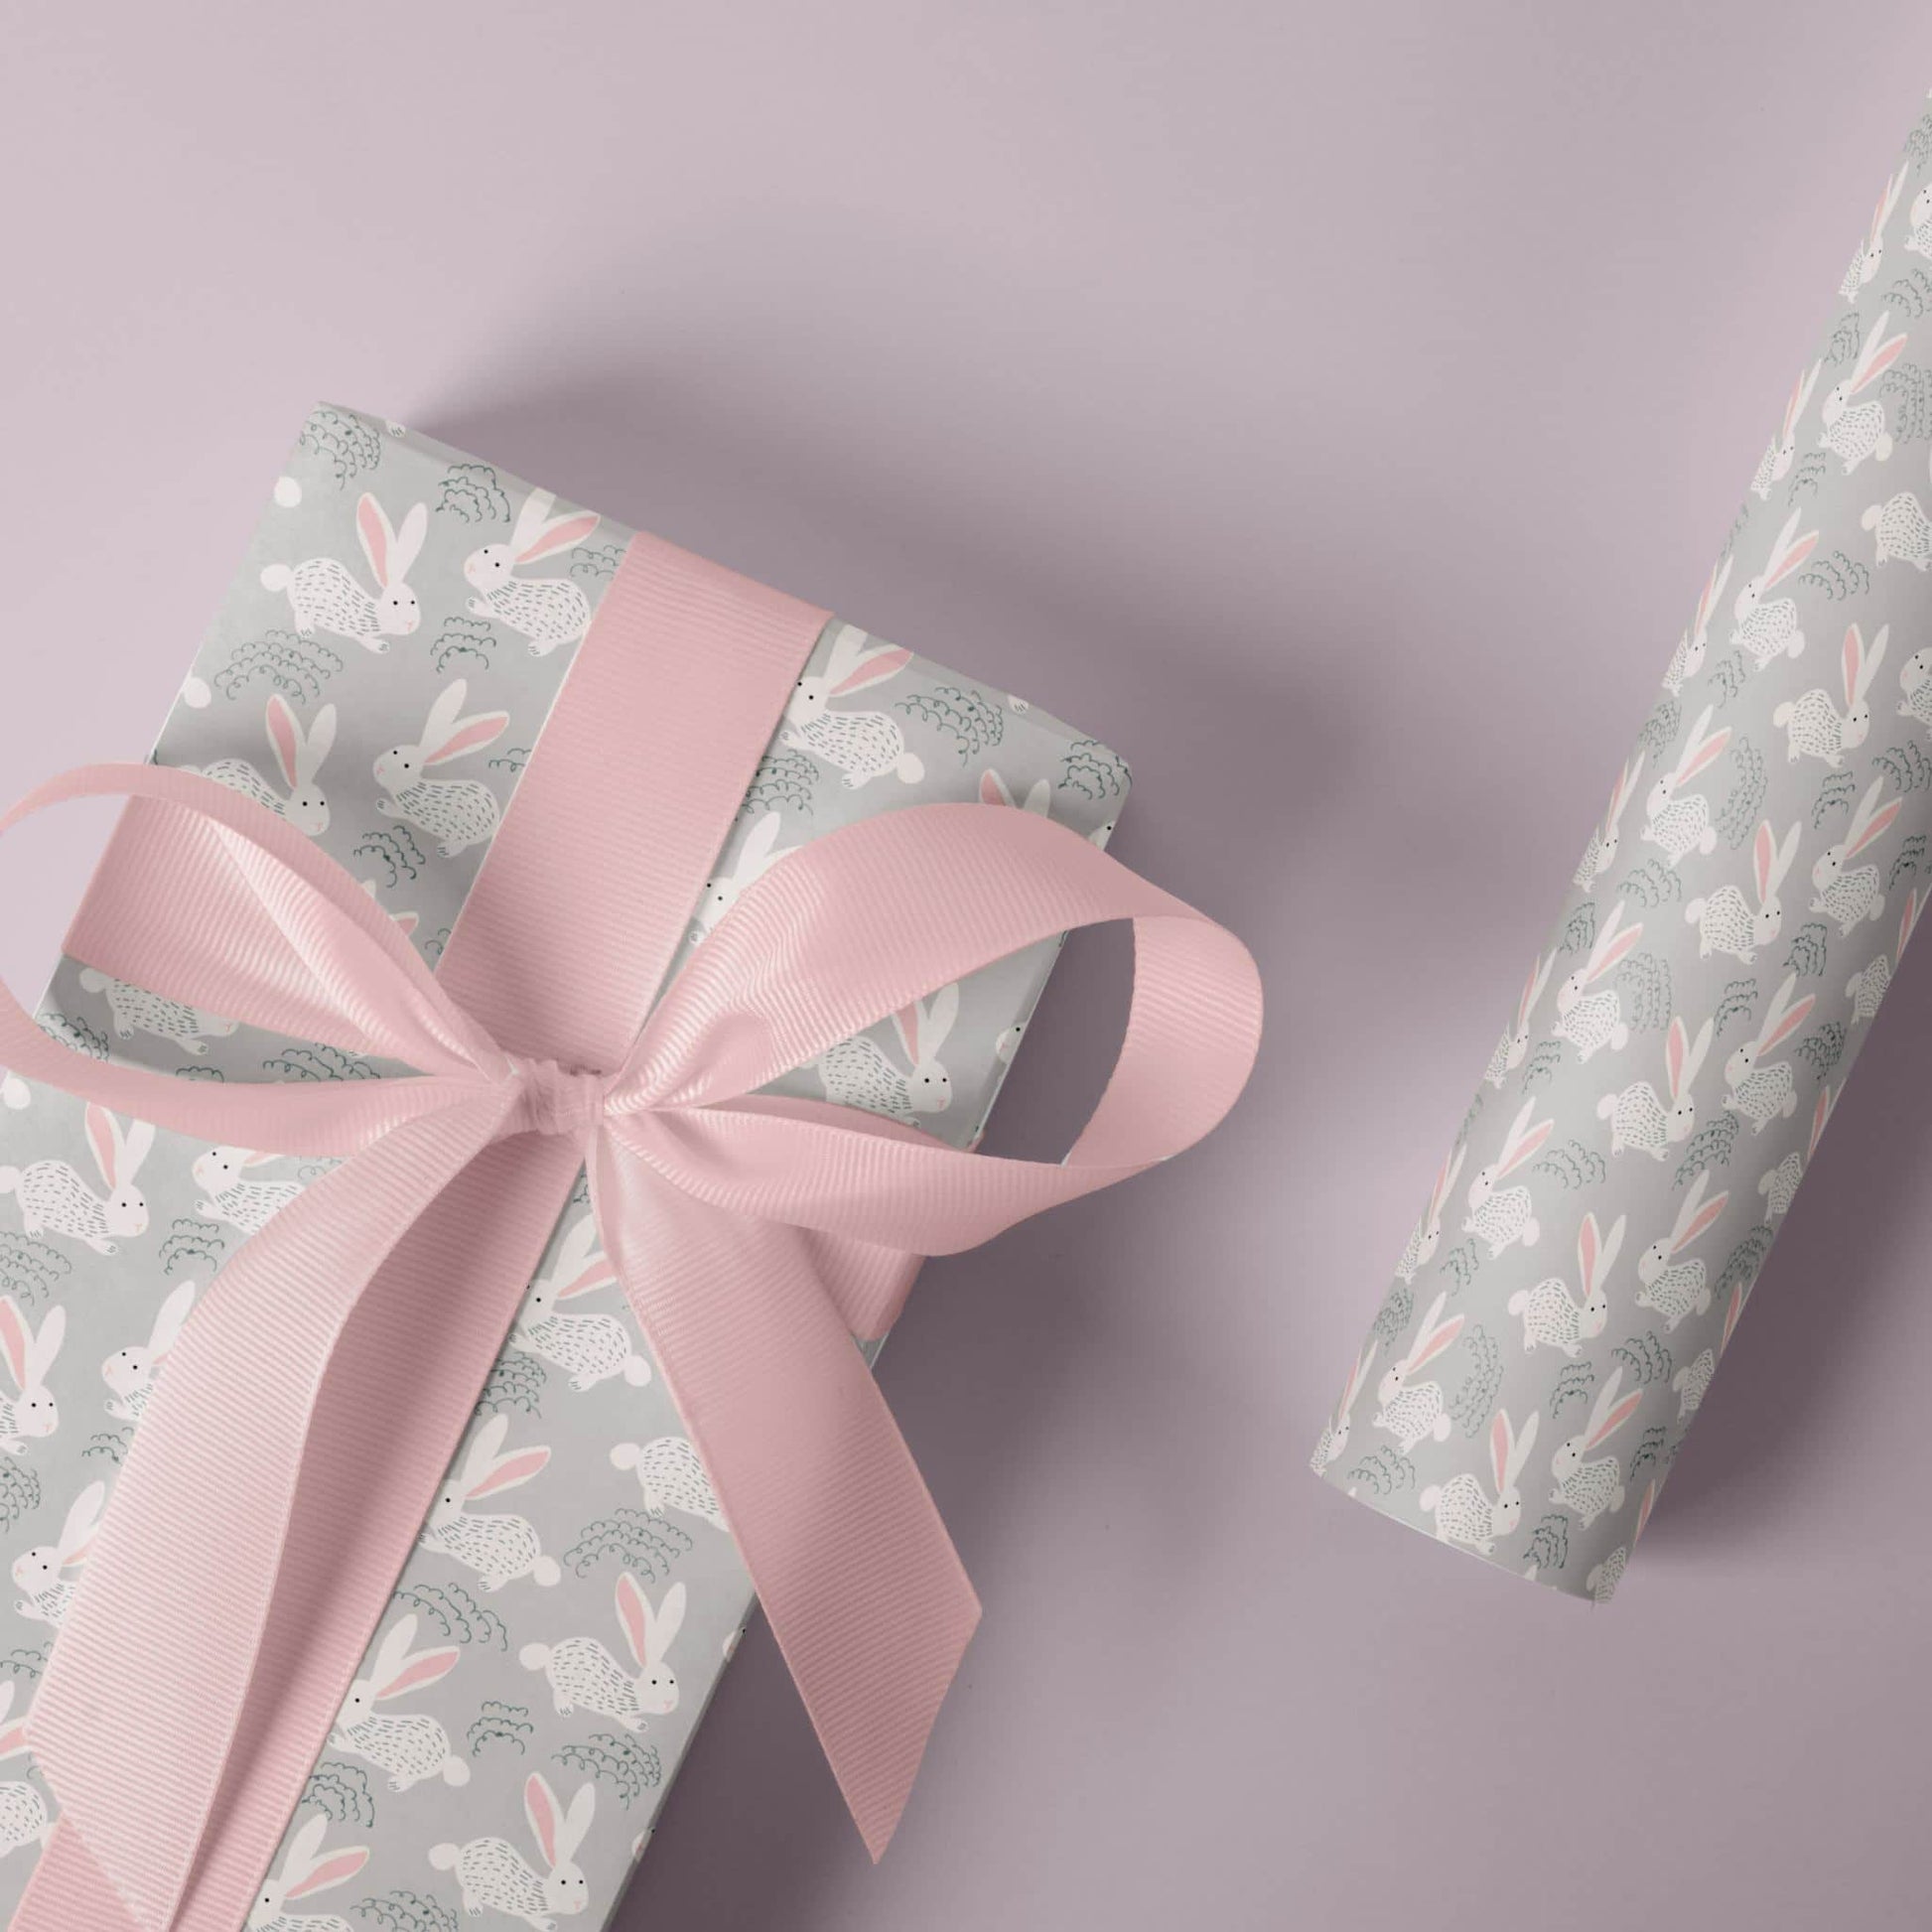 Spring Bunny Wrapping Paper - ZumBuys